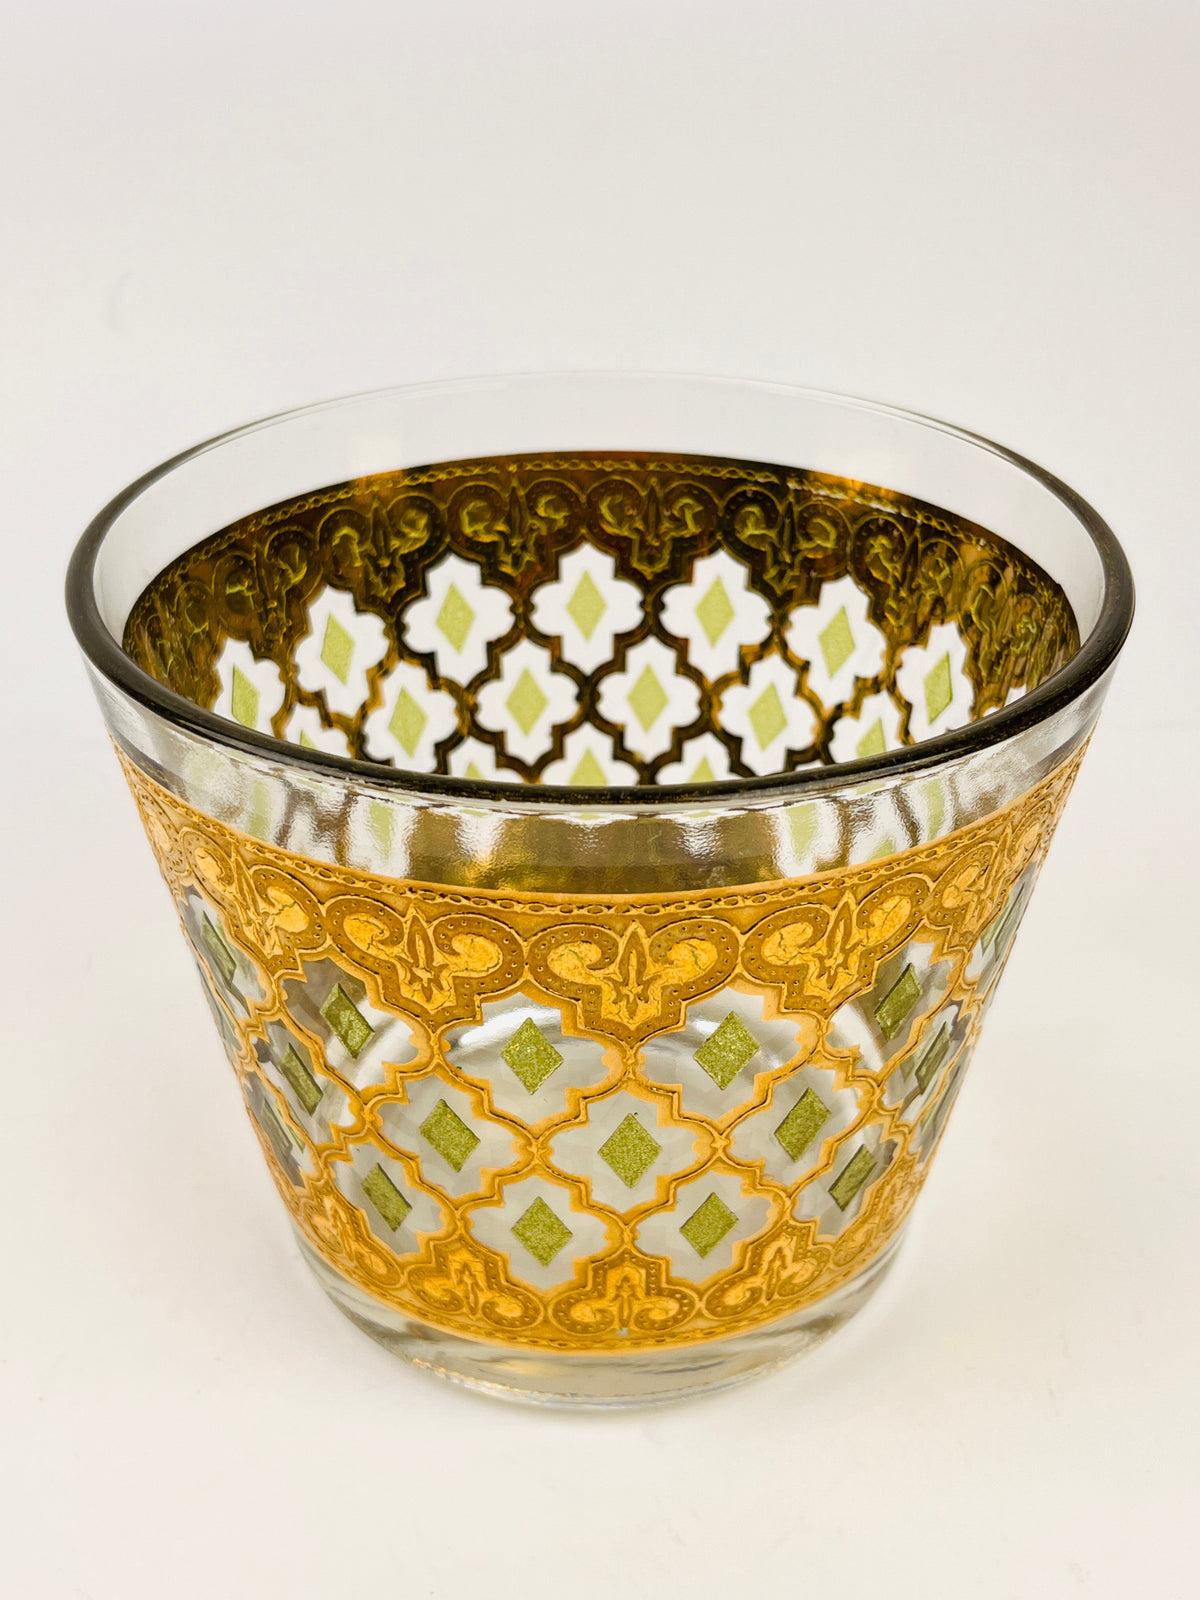 Vintage 22k Gold-Plated Culver Ice Bucket